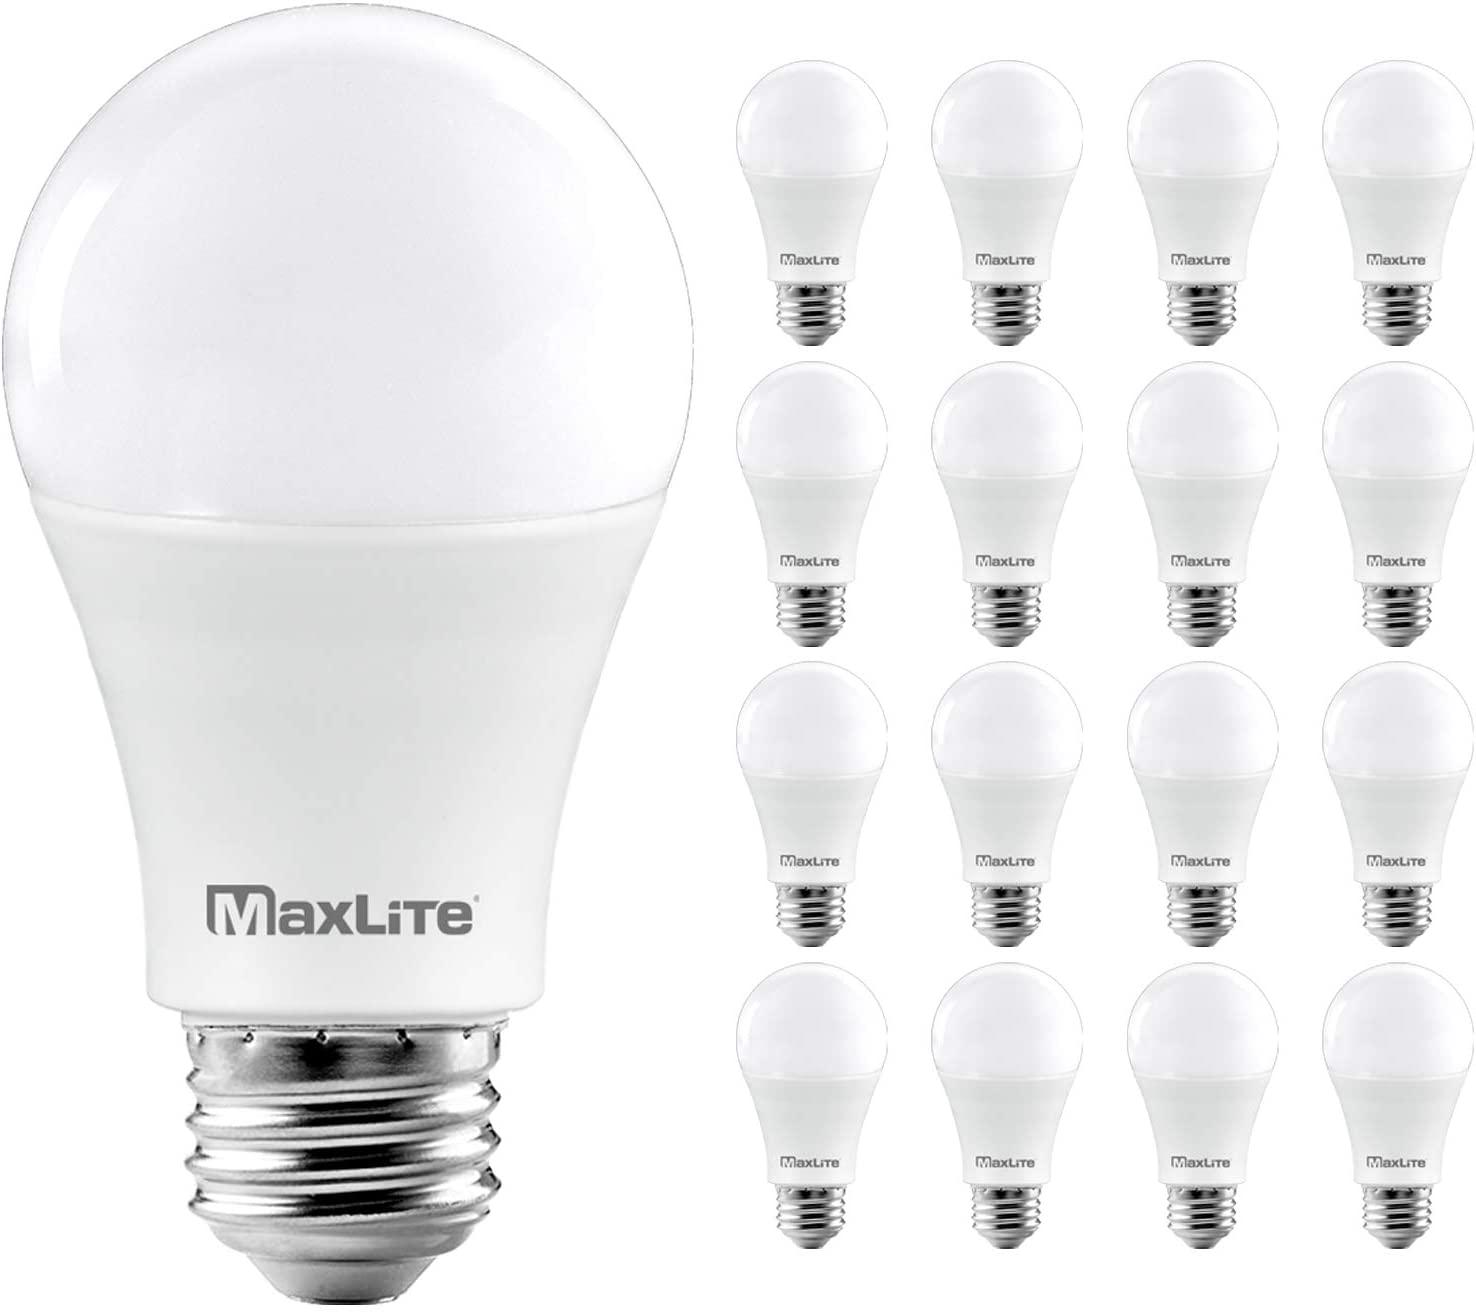 16 MaxLite A19 1600 Lumen 100W Equivalent Dimmable LED Bulbs for $24.93 Shipped